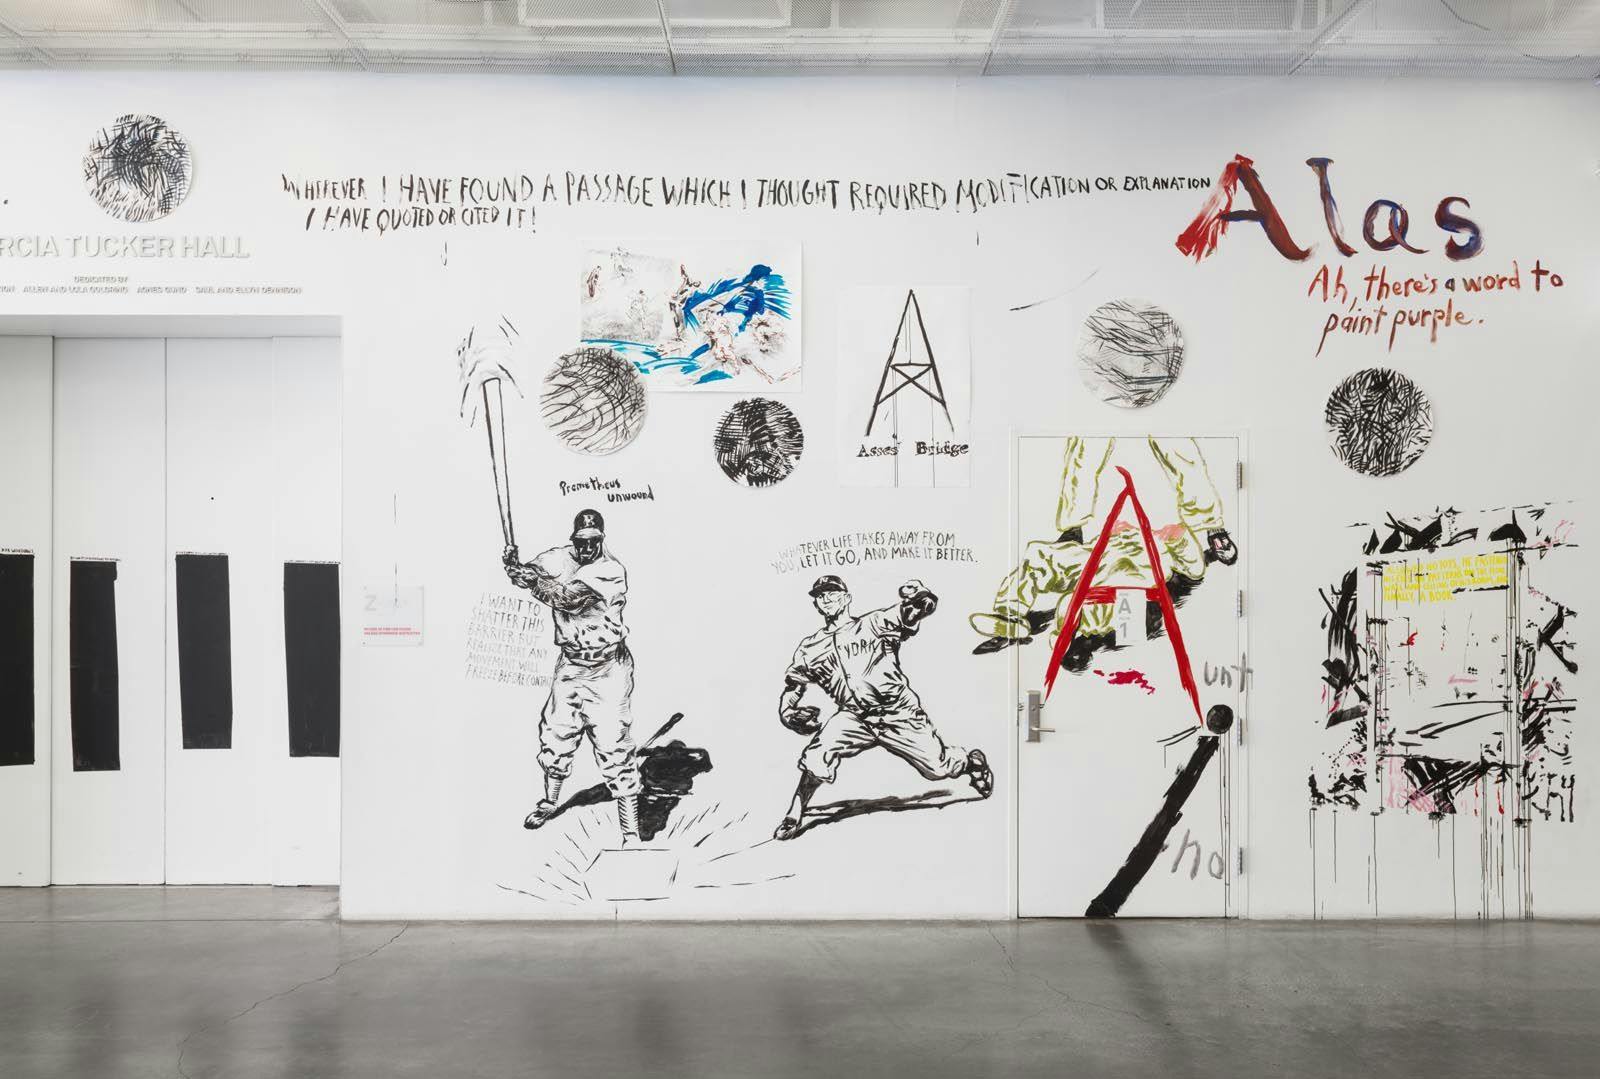 Installation view of¬†the exhibition Raymond Pettibon: A Pen of All Work,¬†at the New Museum in New York, dated 2017.